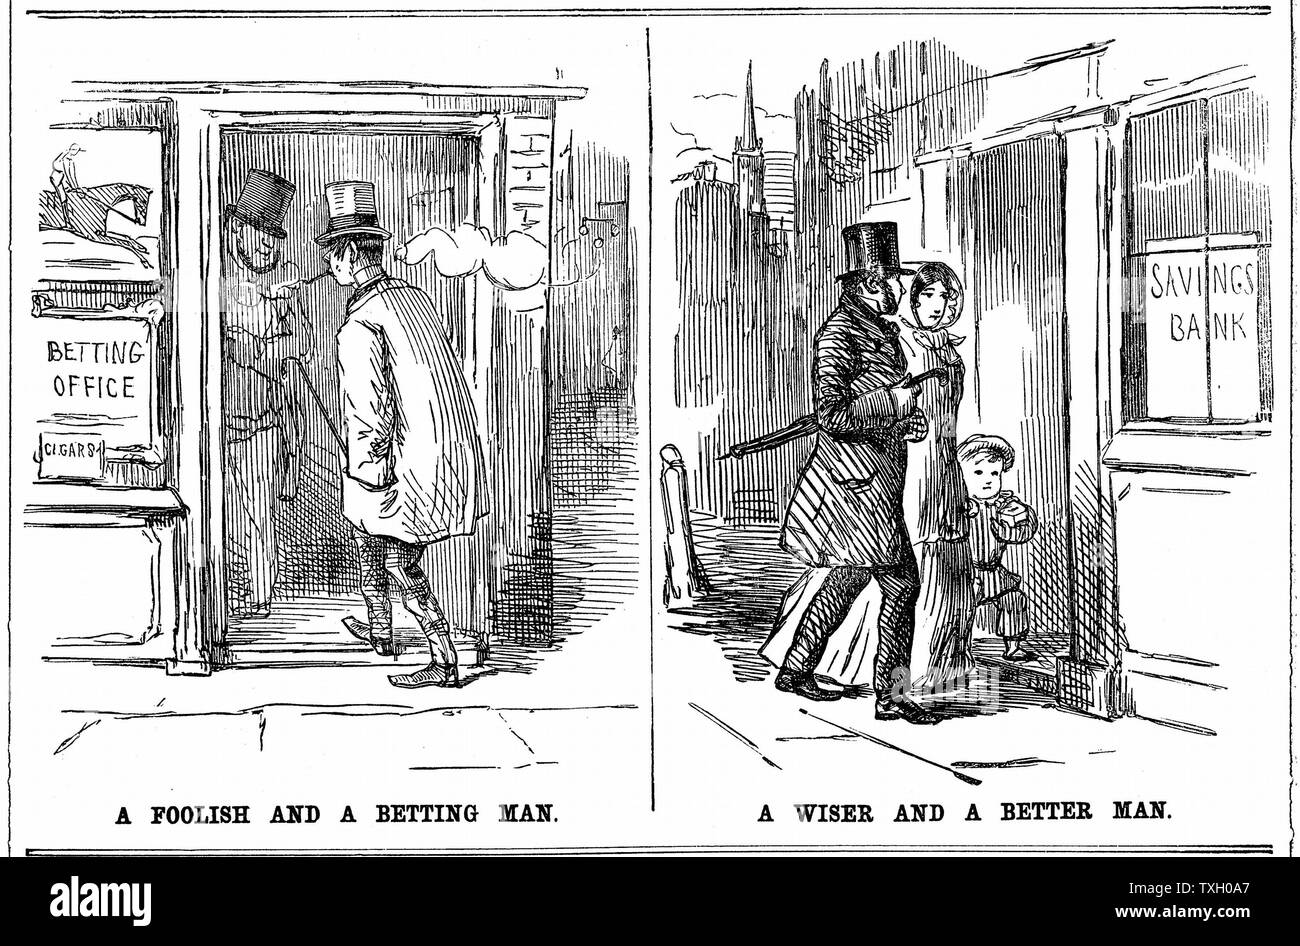 Savings Bank: 'A Foolish and a Betting Man' and 'A Wise and a Better Man' cartoon from 'Punch' London 1852 on the folly of profligacy of smoking and betting and the wisdom and prudence of saving. Stock Photo